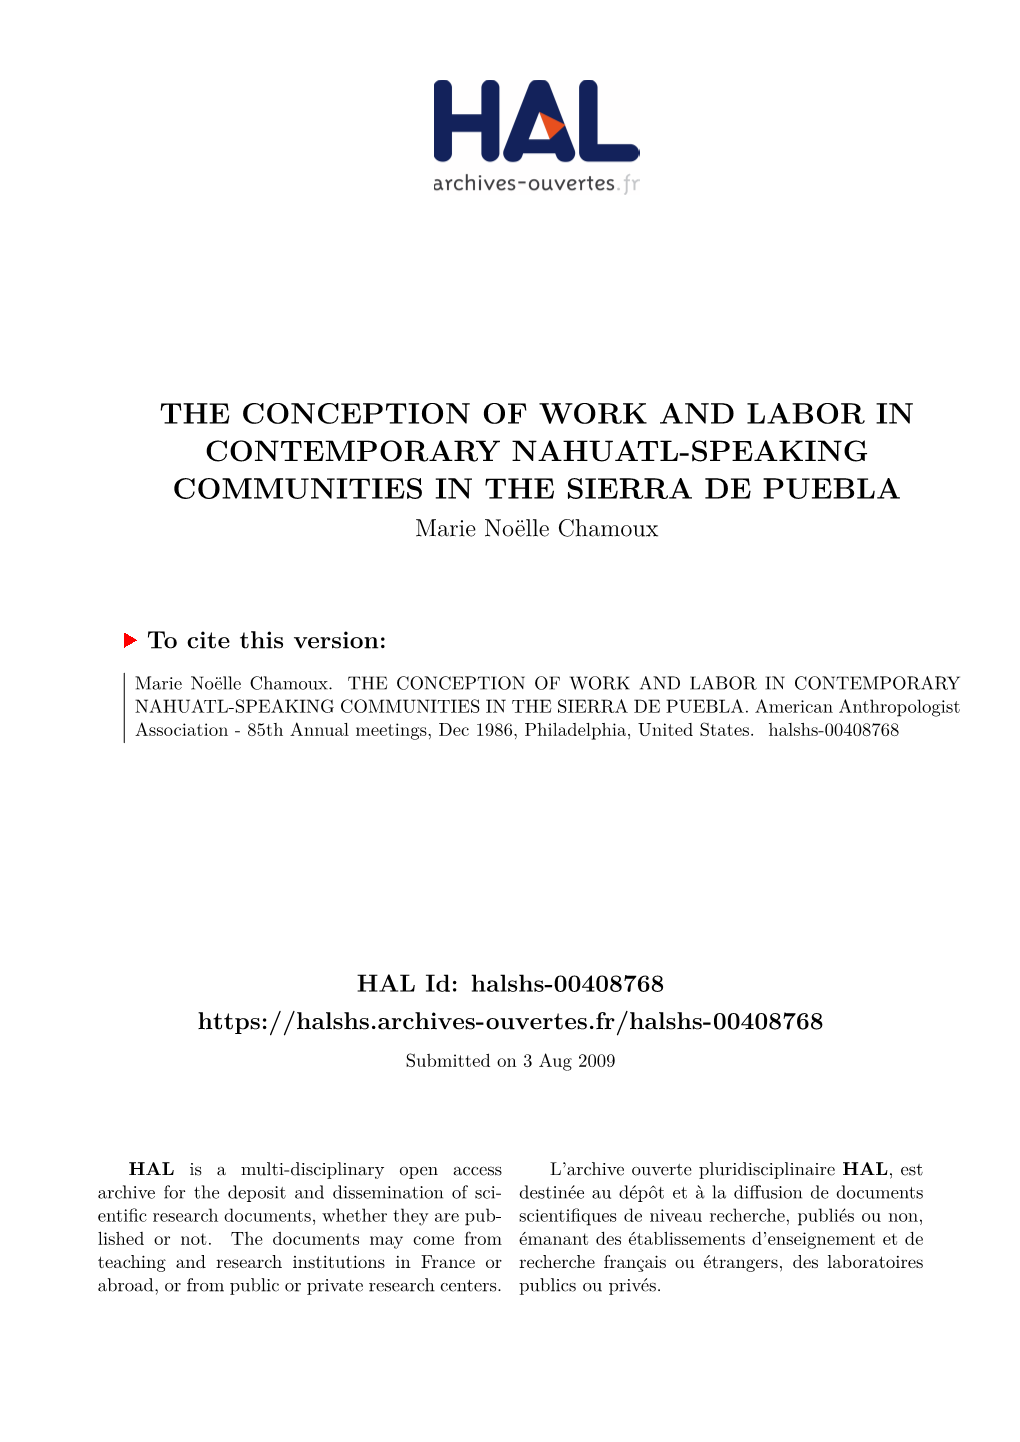 THE CONCEPTION of WORK and LABOR in CONTEMPORARY NAHUATL-SPEAKING COMMUNITIES in the SIERRA DE PUEBLA Marie Noëlle Chamoux